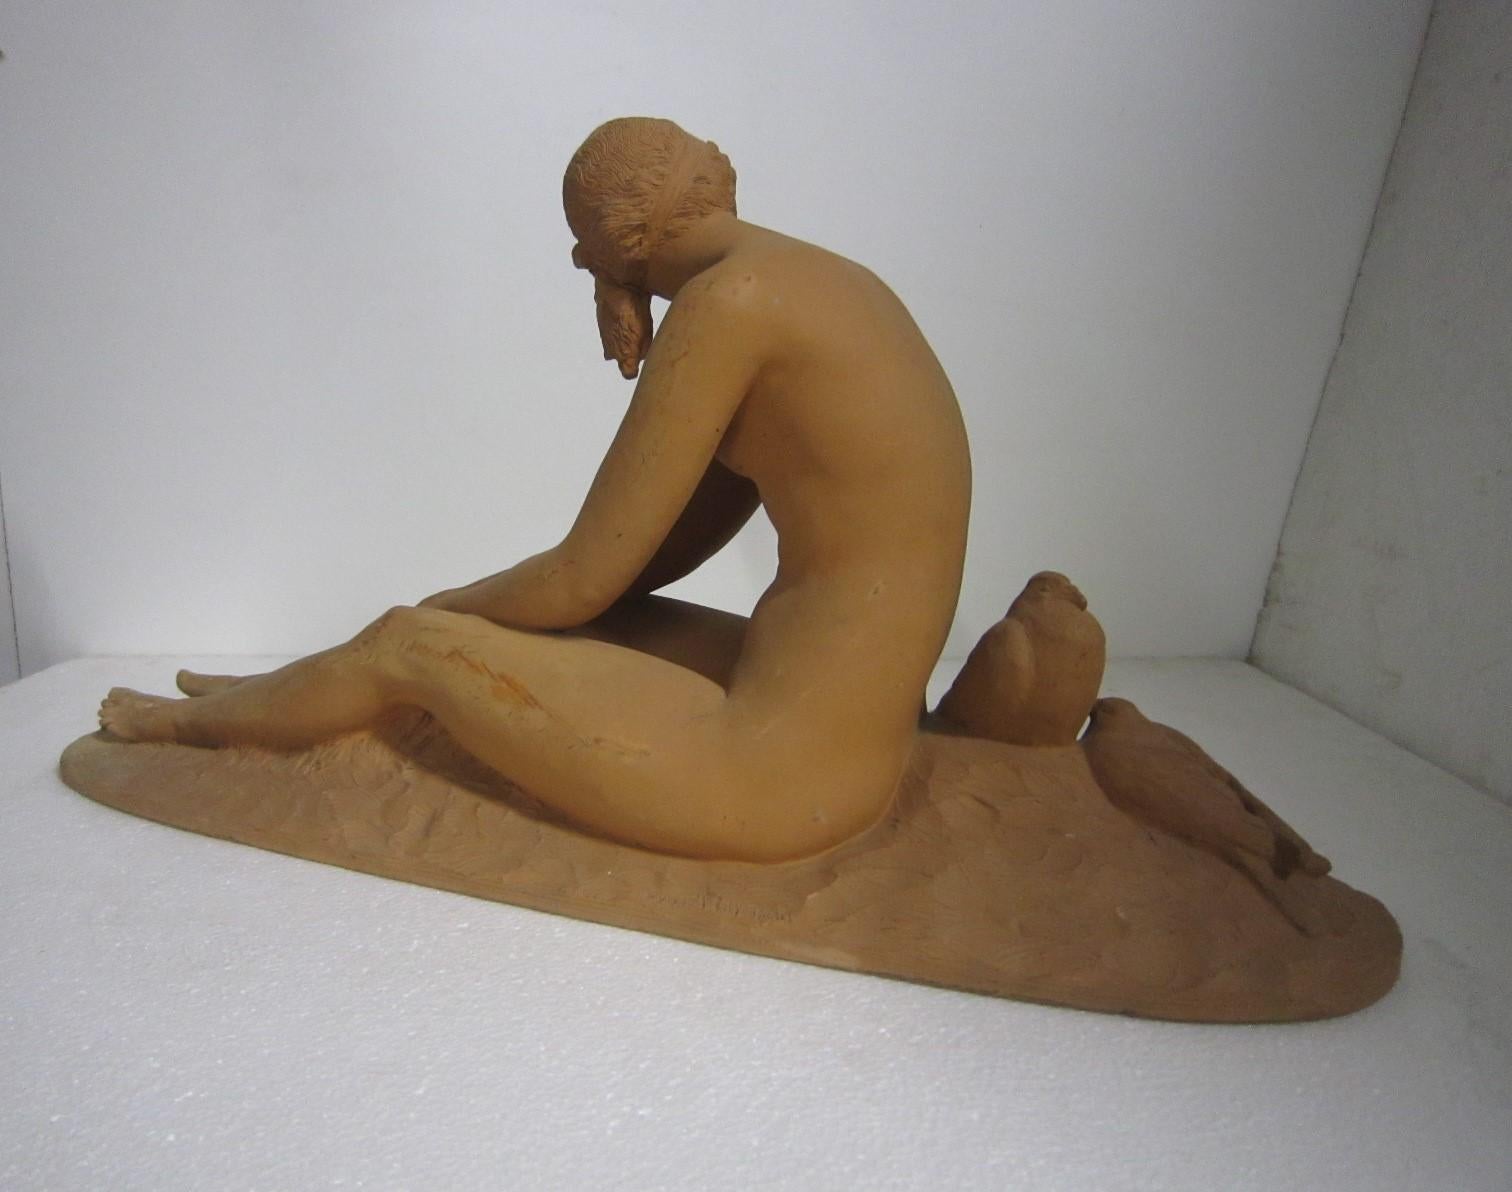 A fine French Art Deco original sculpture of a nude seated on an oval, racetrack shaped self plinth.
The female nude reclines bare chested alongside a pair of dove birds by her side, with a sweet but seductive demeanor, in a soft nude terracotta